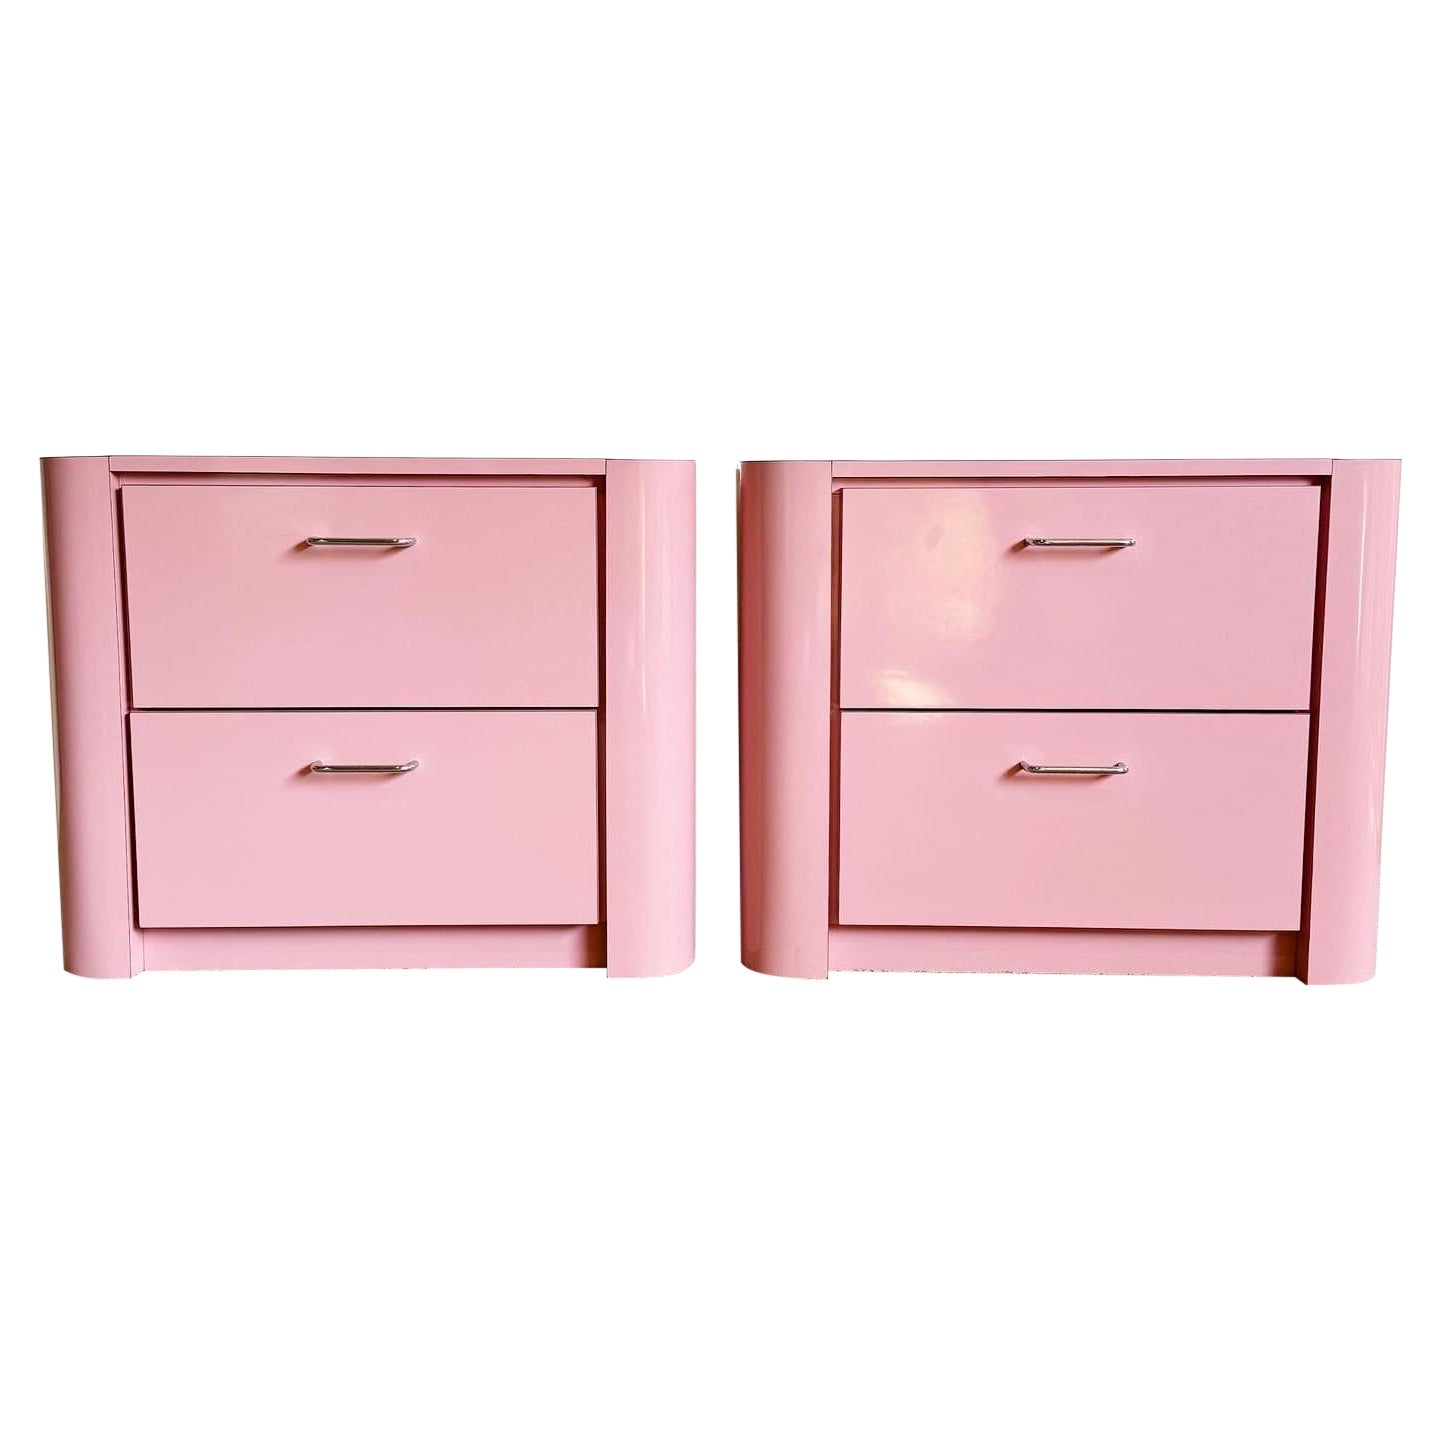 Postmodern Pink Lacquer Laminate Nightstands With Chrome Handles - a Pair